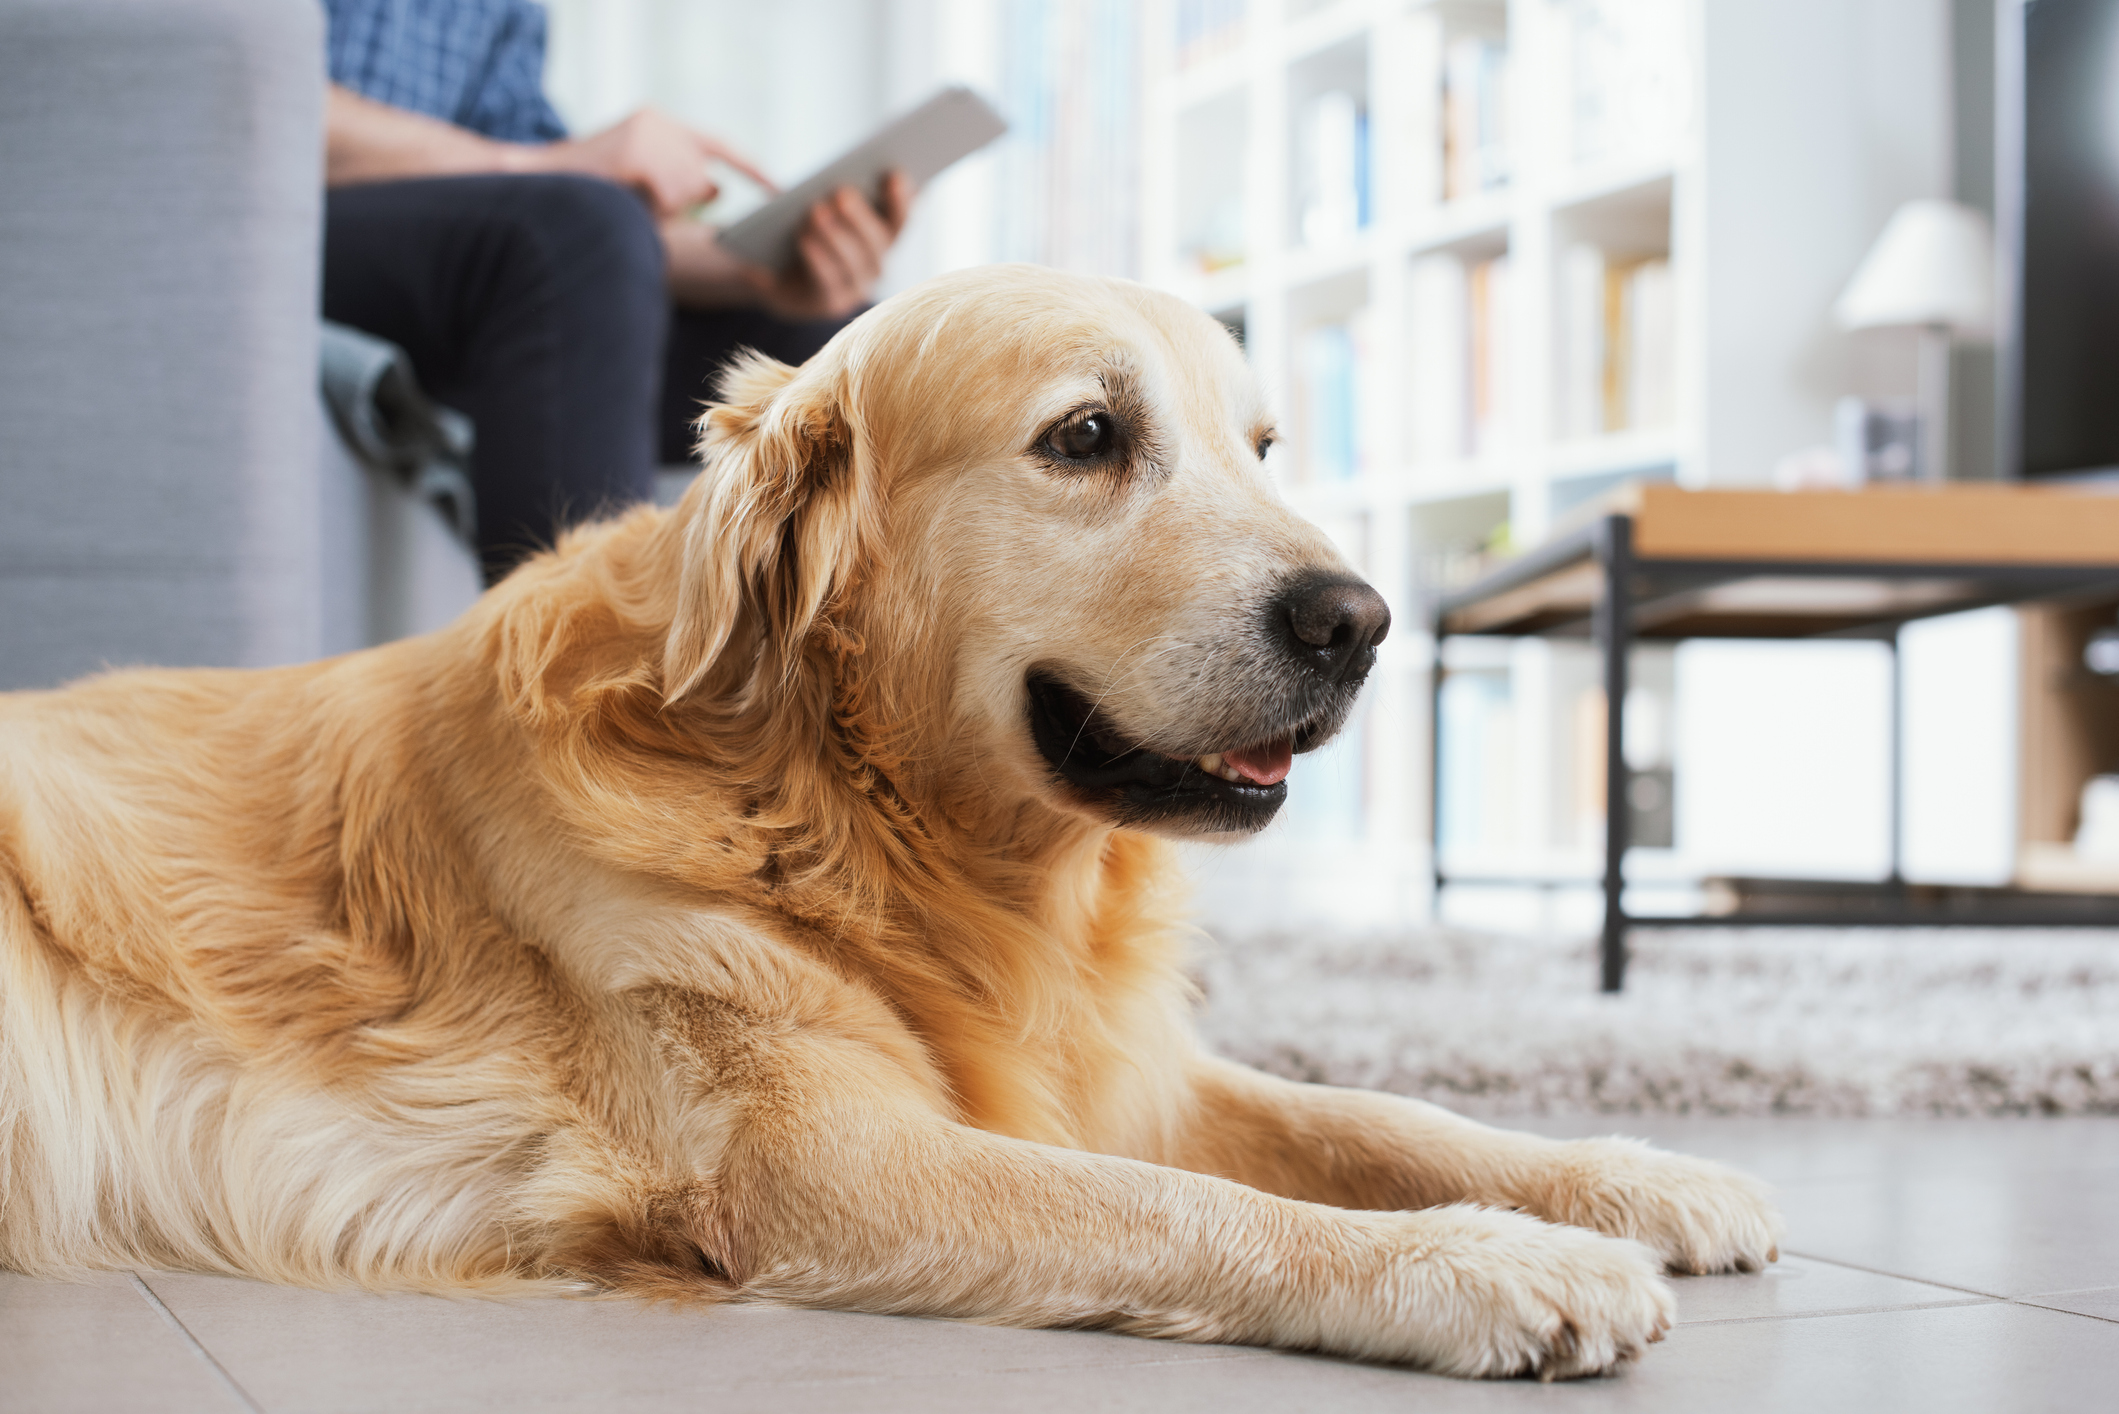 Pets and Technology: The Latest Wave of Multifamily Innovation